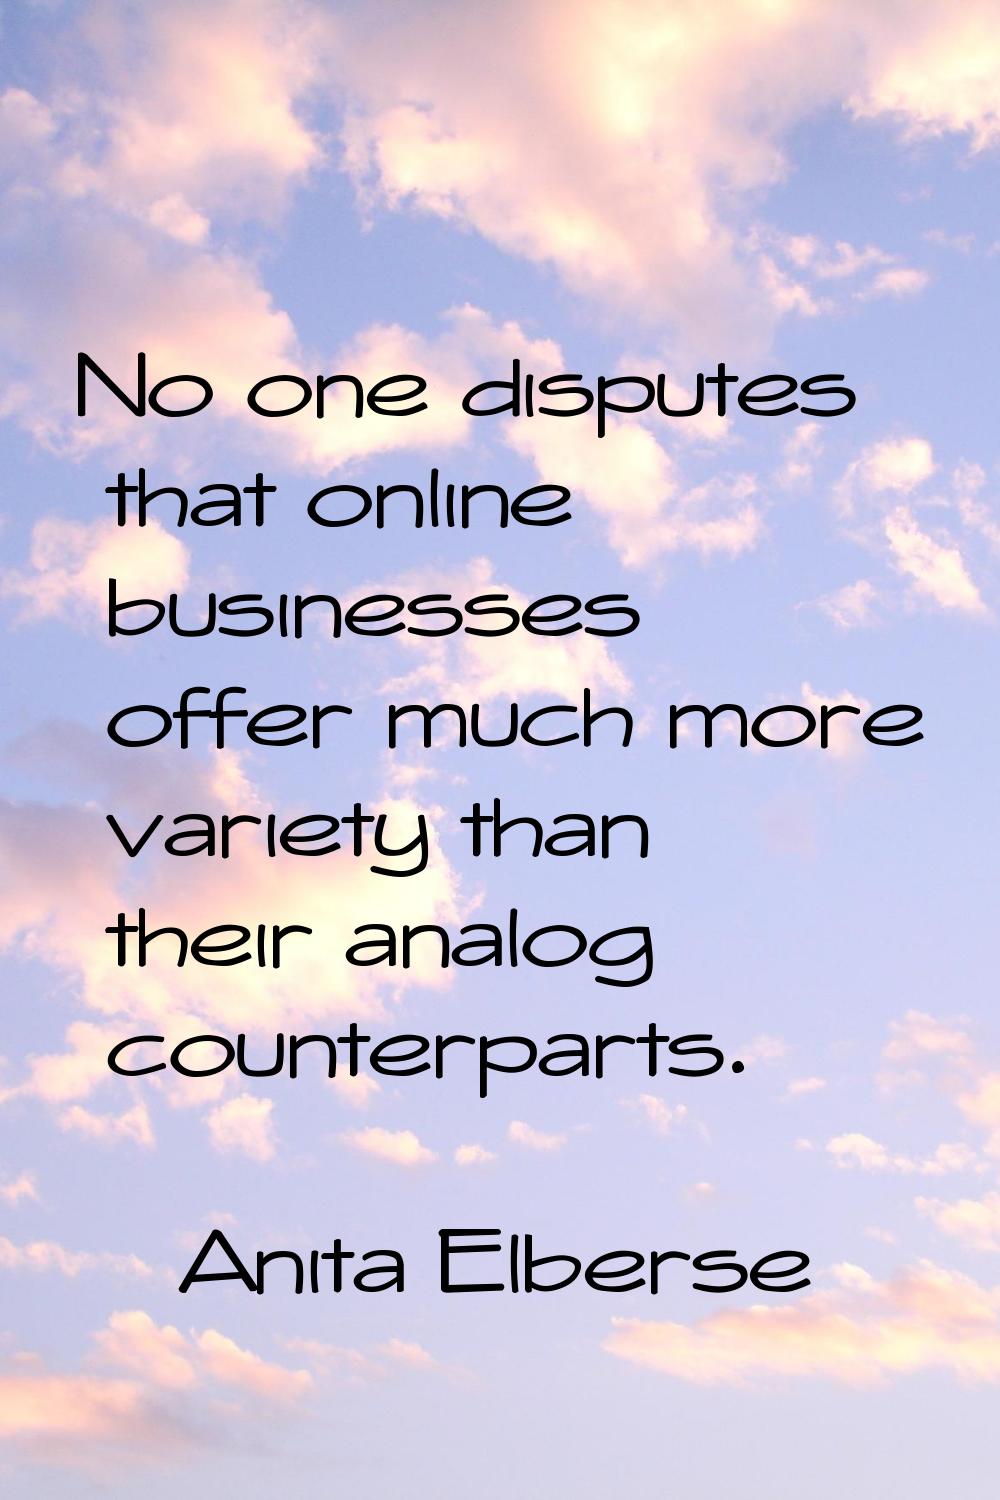 No one disputes that online businesses offer much more variety than their analog counterparts.